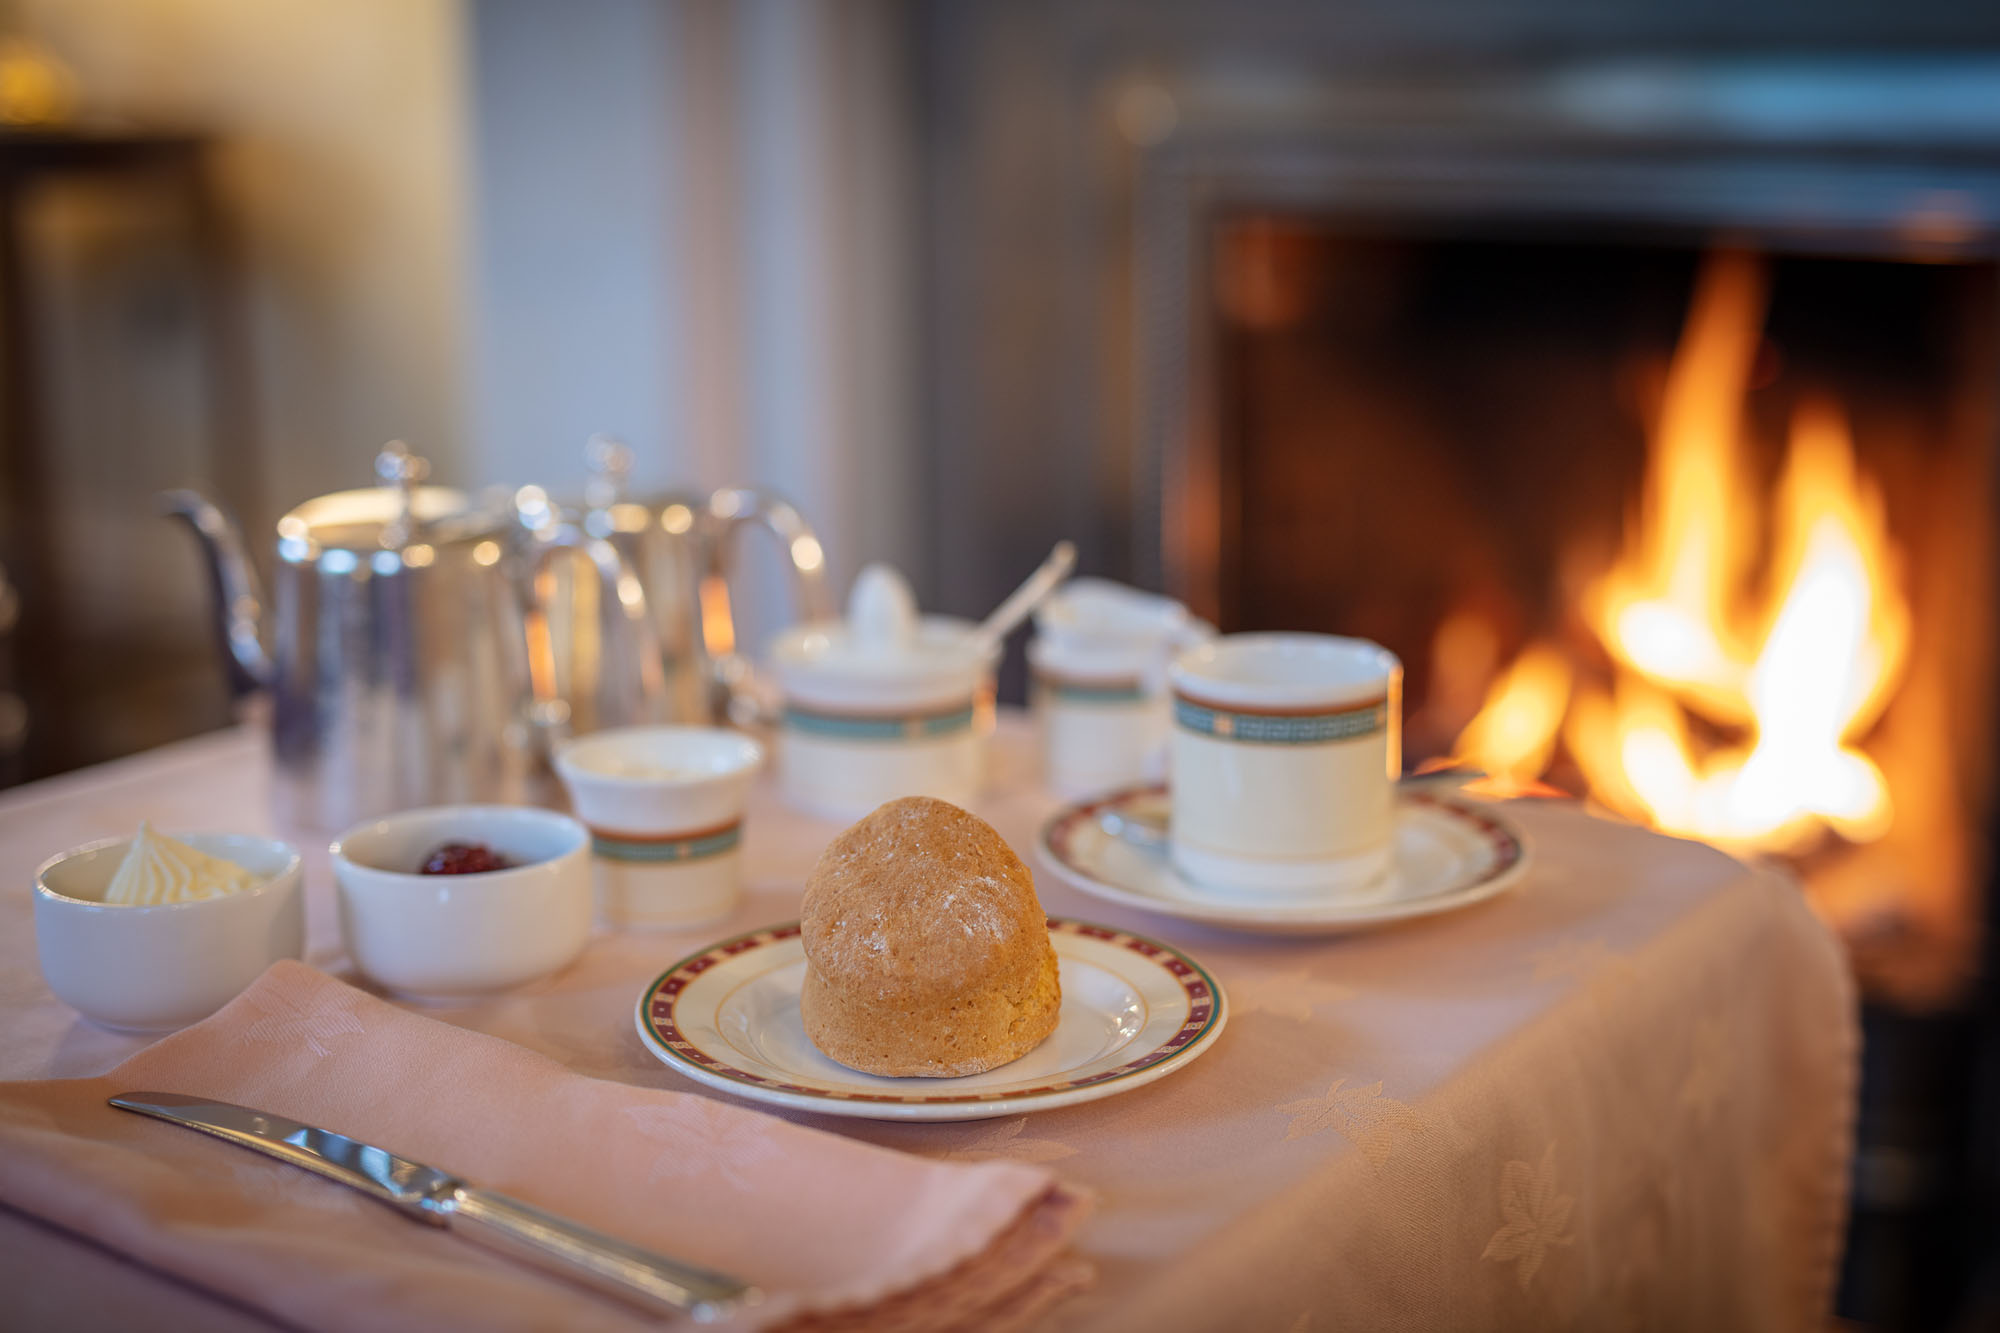 Tea and scone by the lounge fire